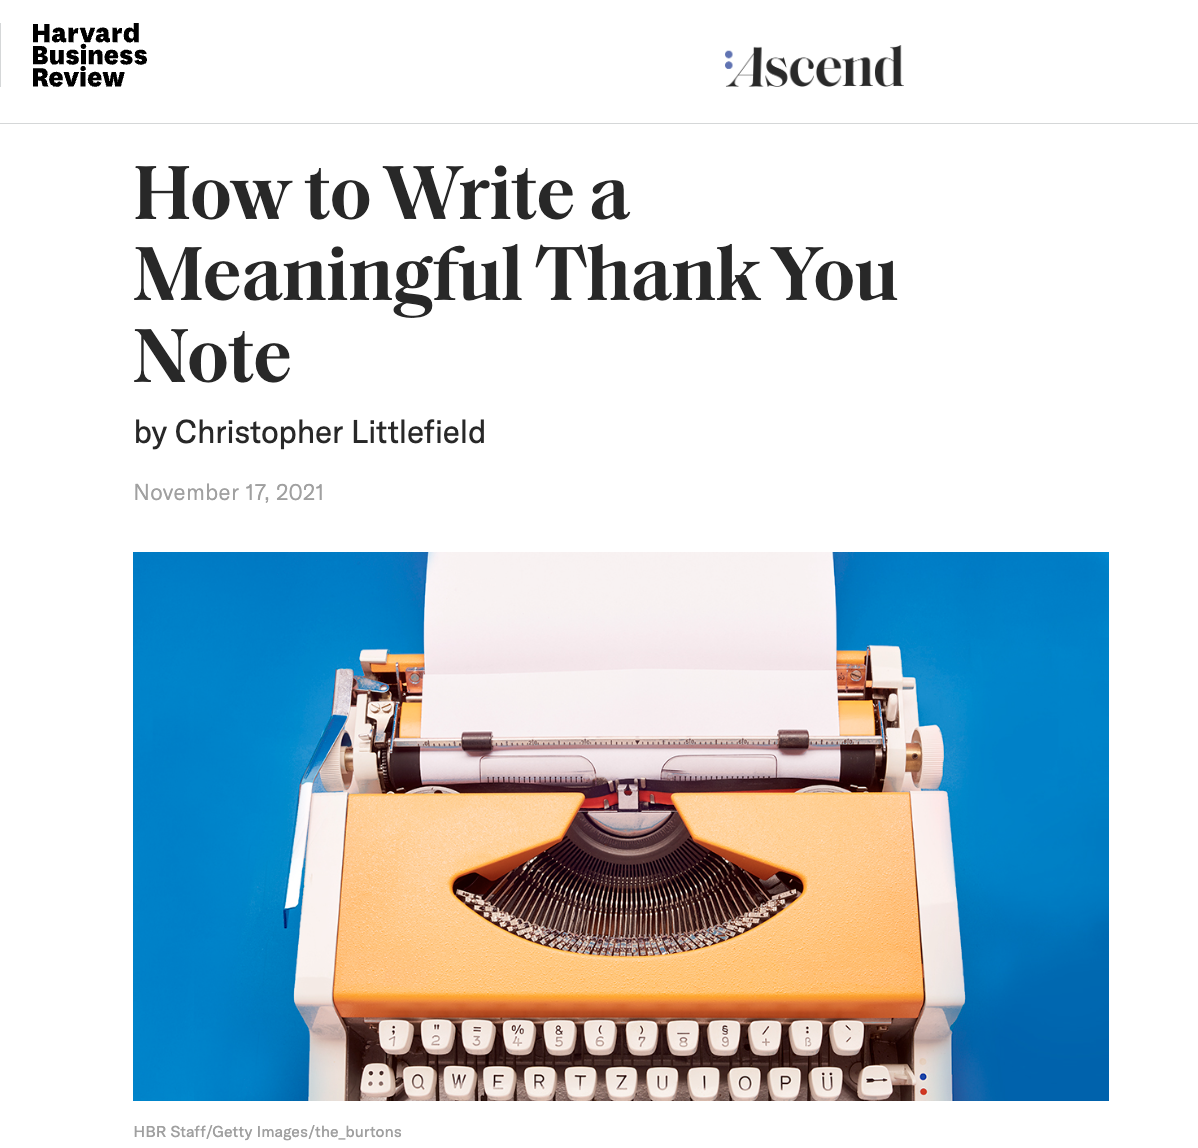 https://hbr.org/2021/11/how-to-write-a-meaningful-thank-you-note (Copy) (Copy)